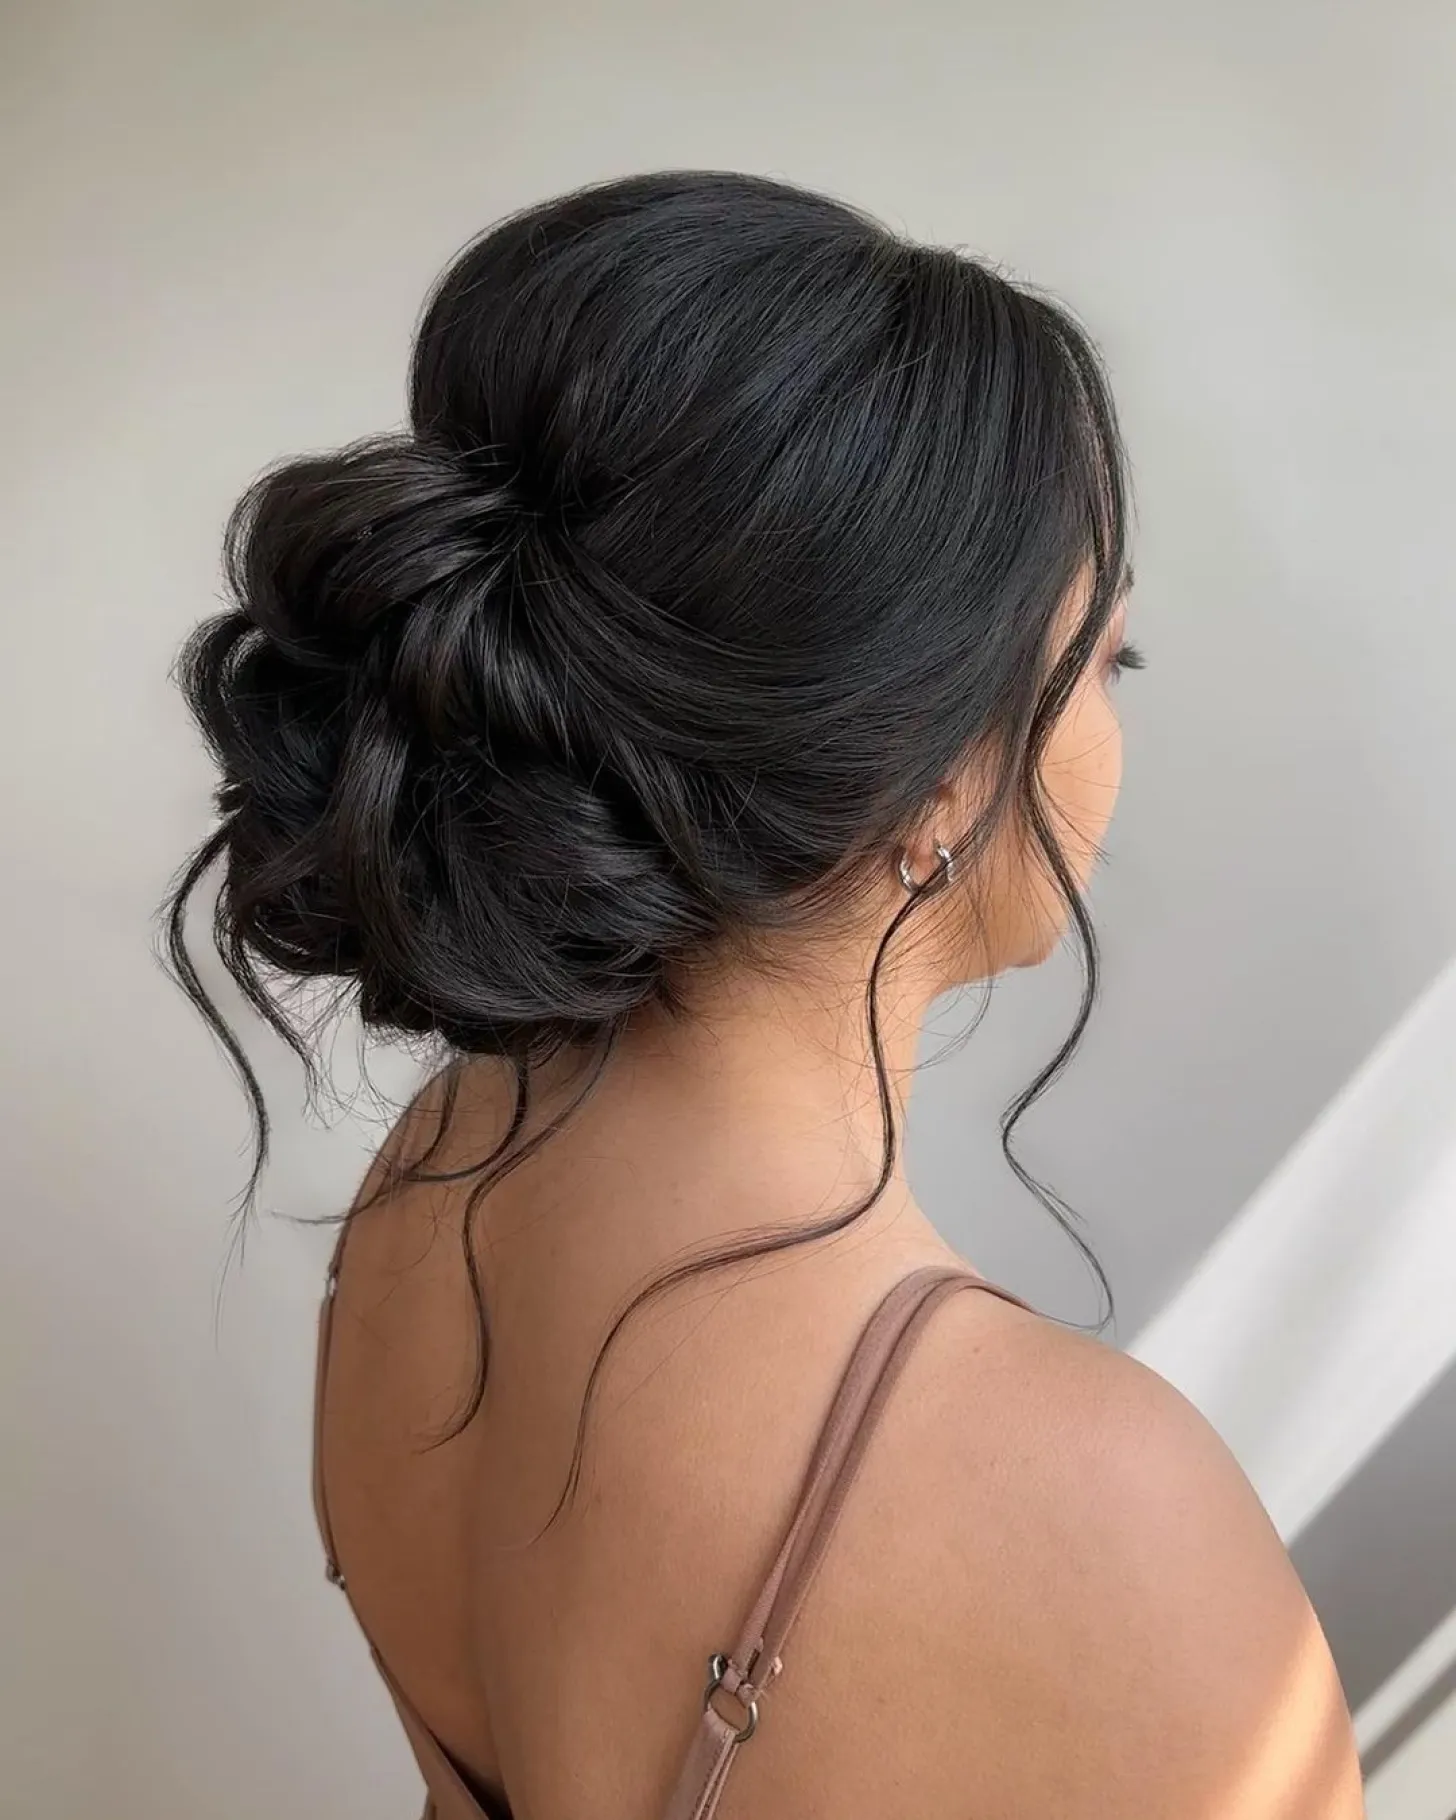 Stunning Wedding Hair Updos for Brides-To-Be